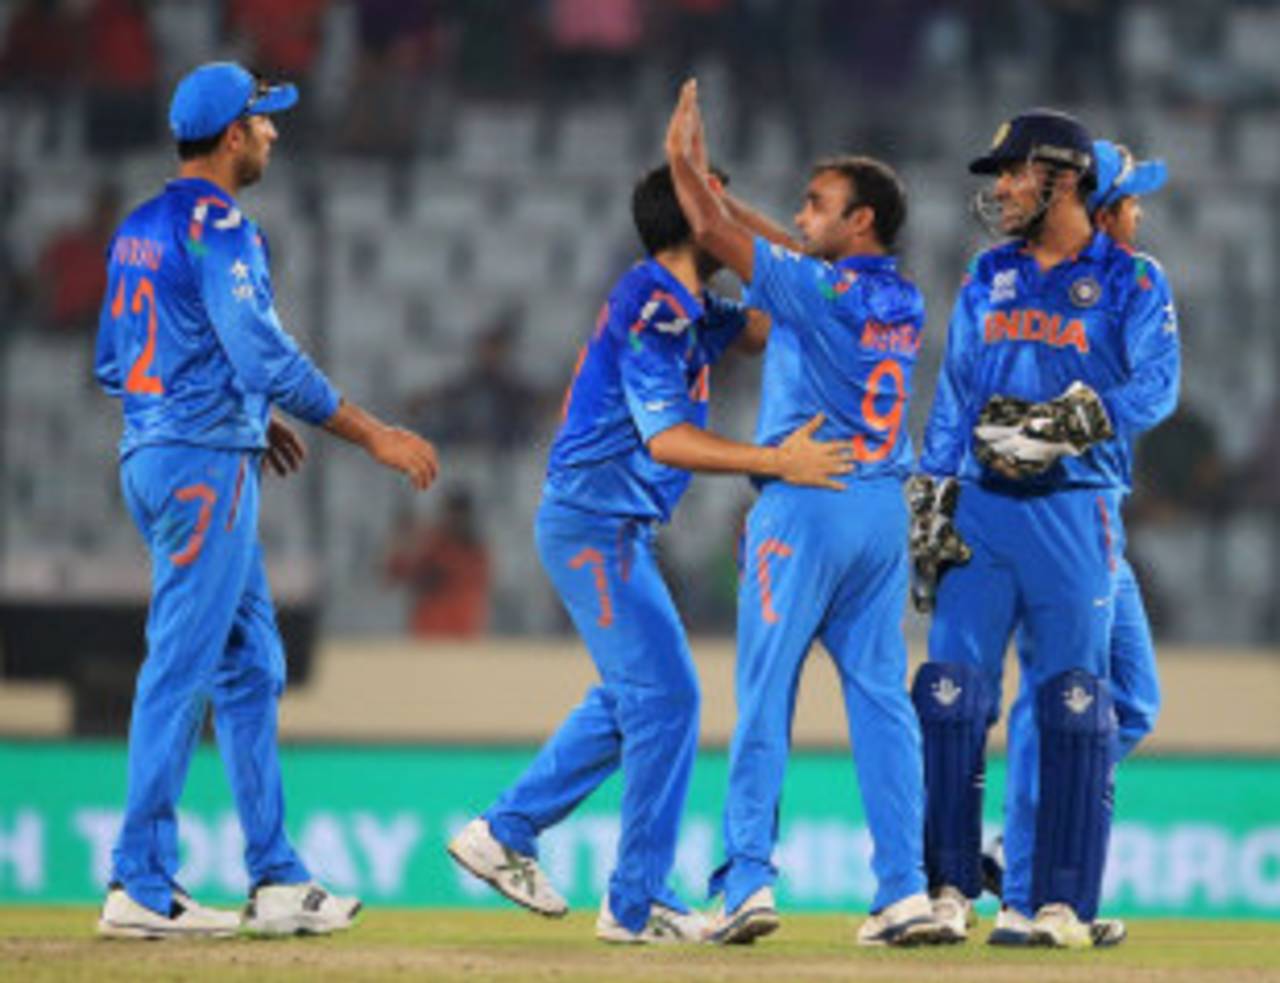 Amit Mishra picked up two wickets, Australia v India, World T20, Group 2, Mirpur, March 30, 2014